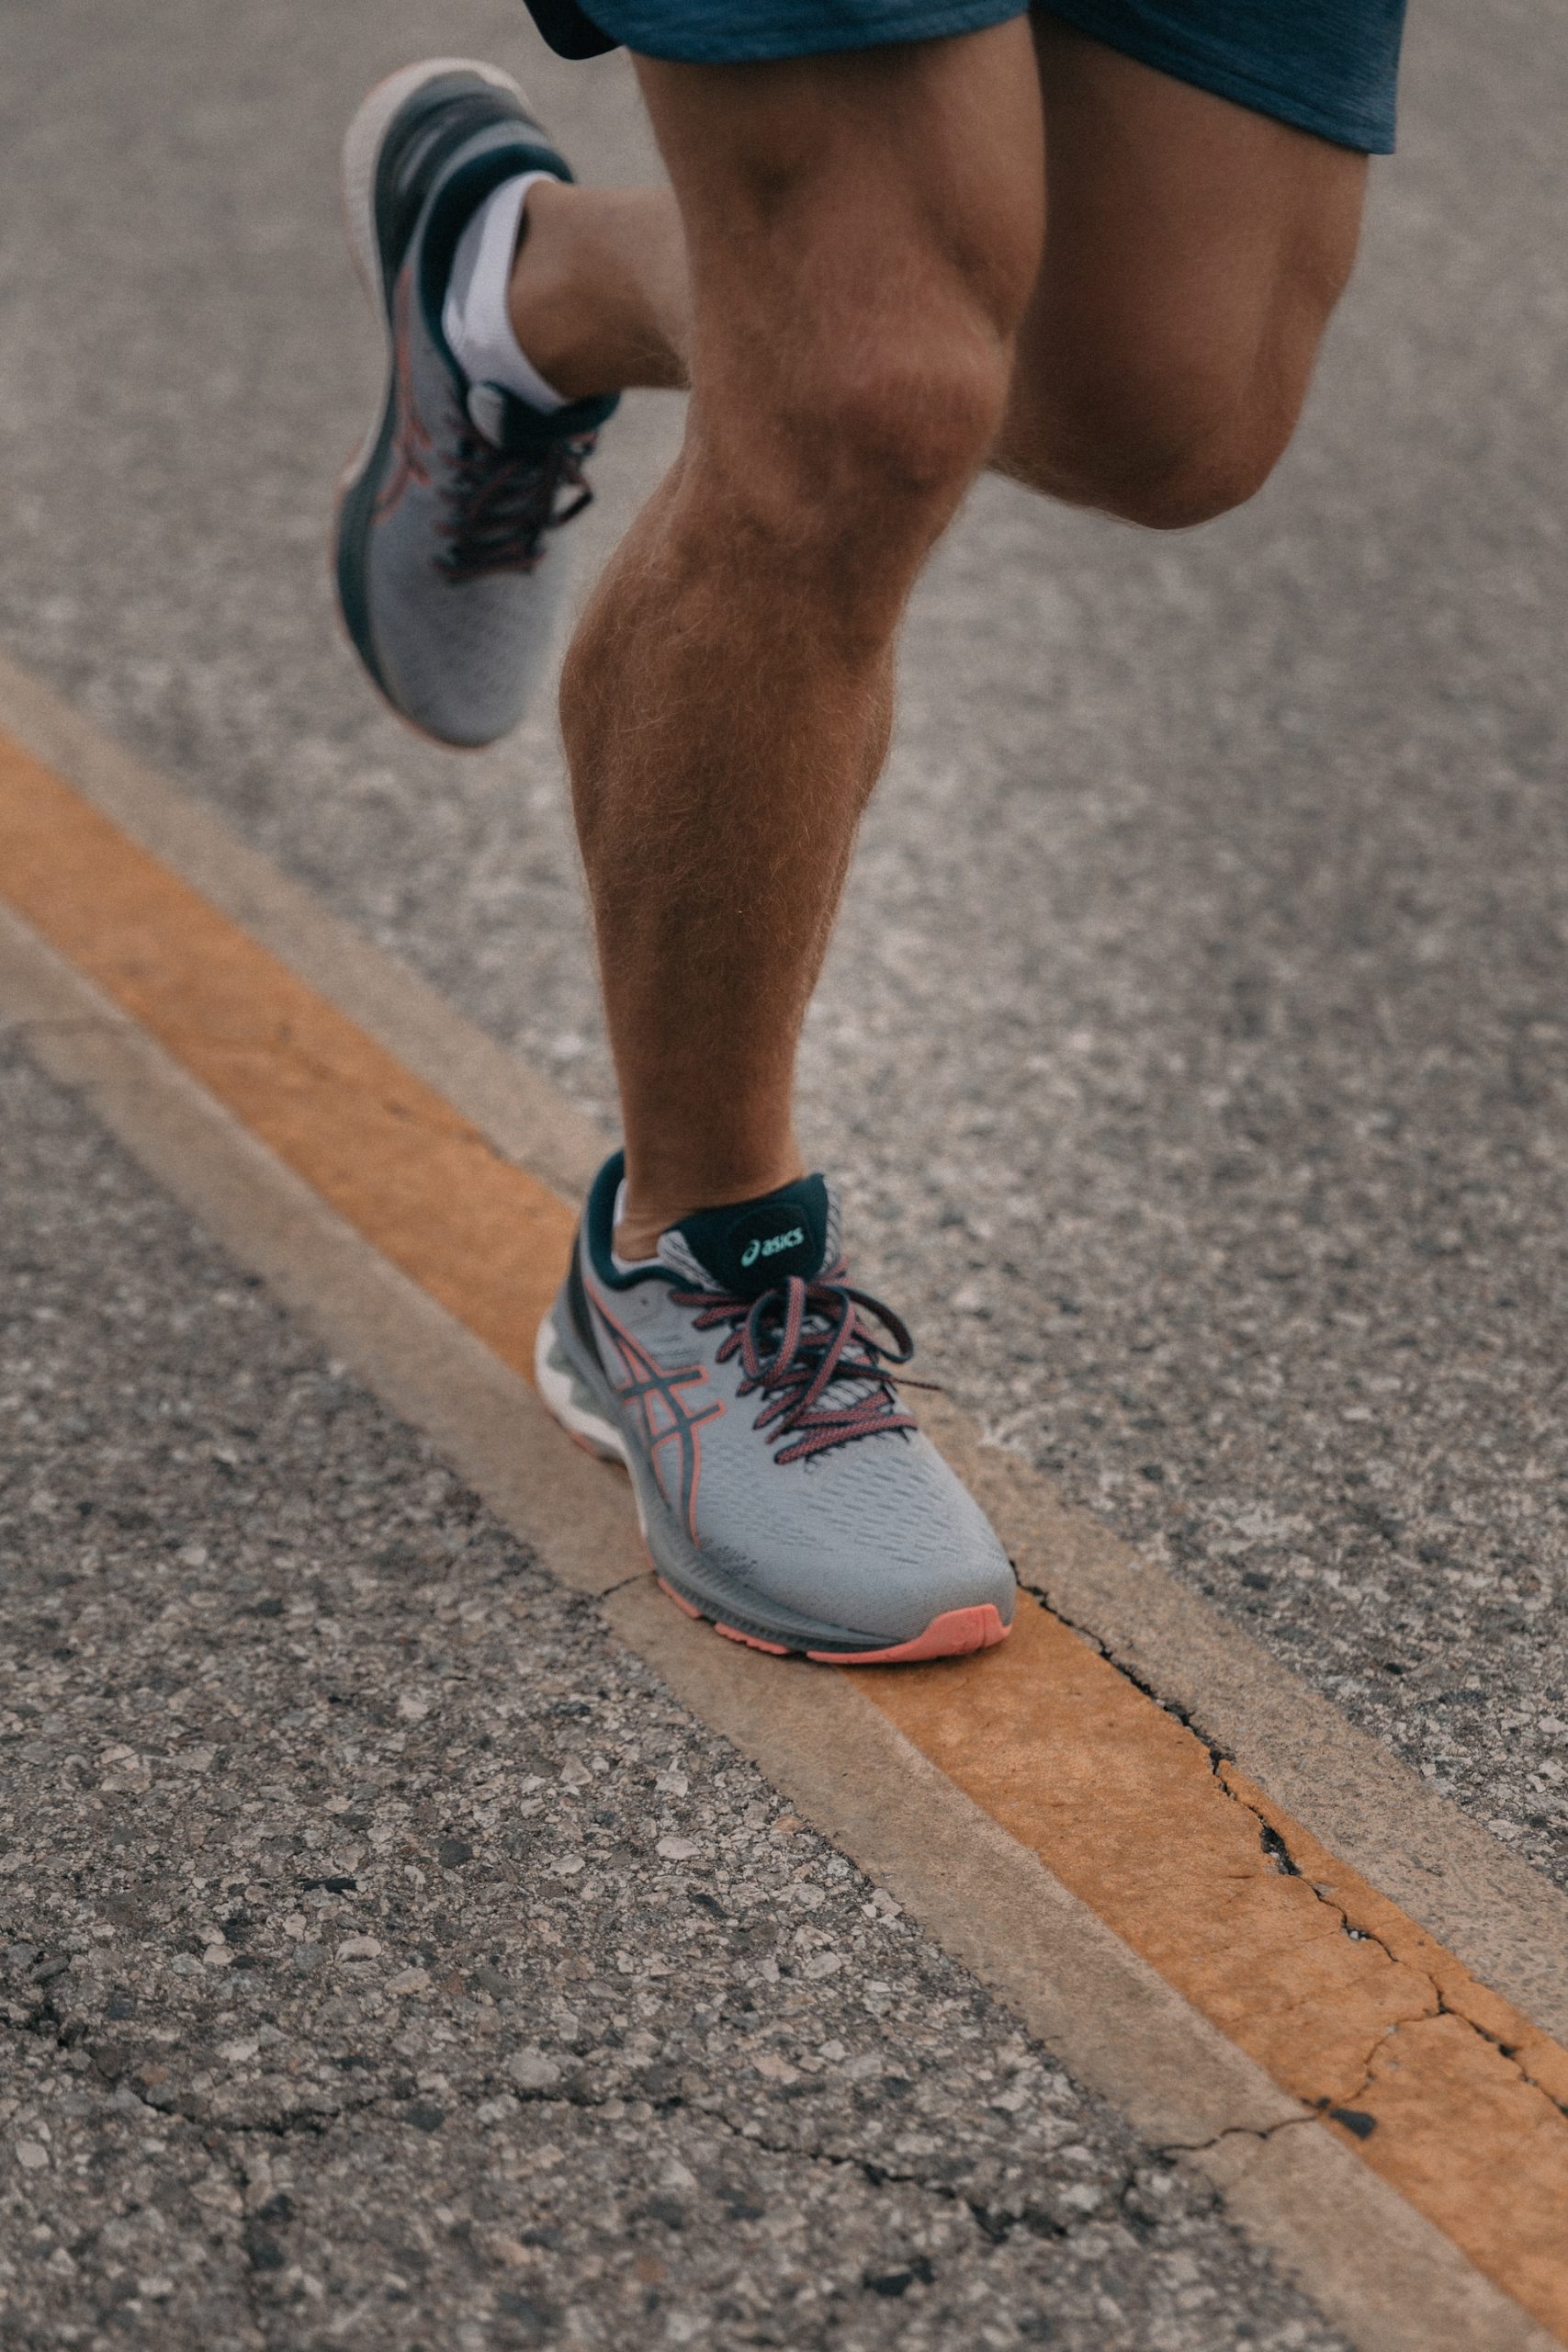 the image shows a male feet running